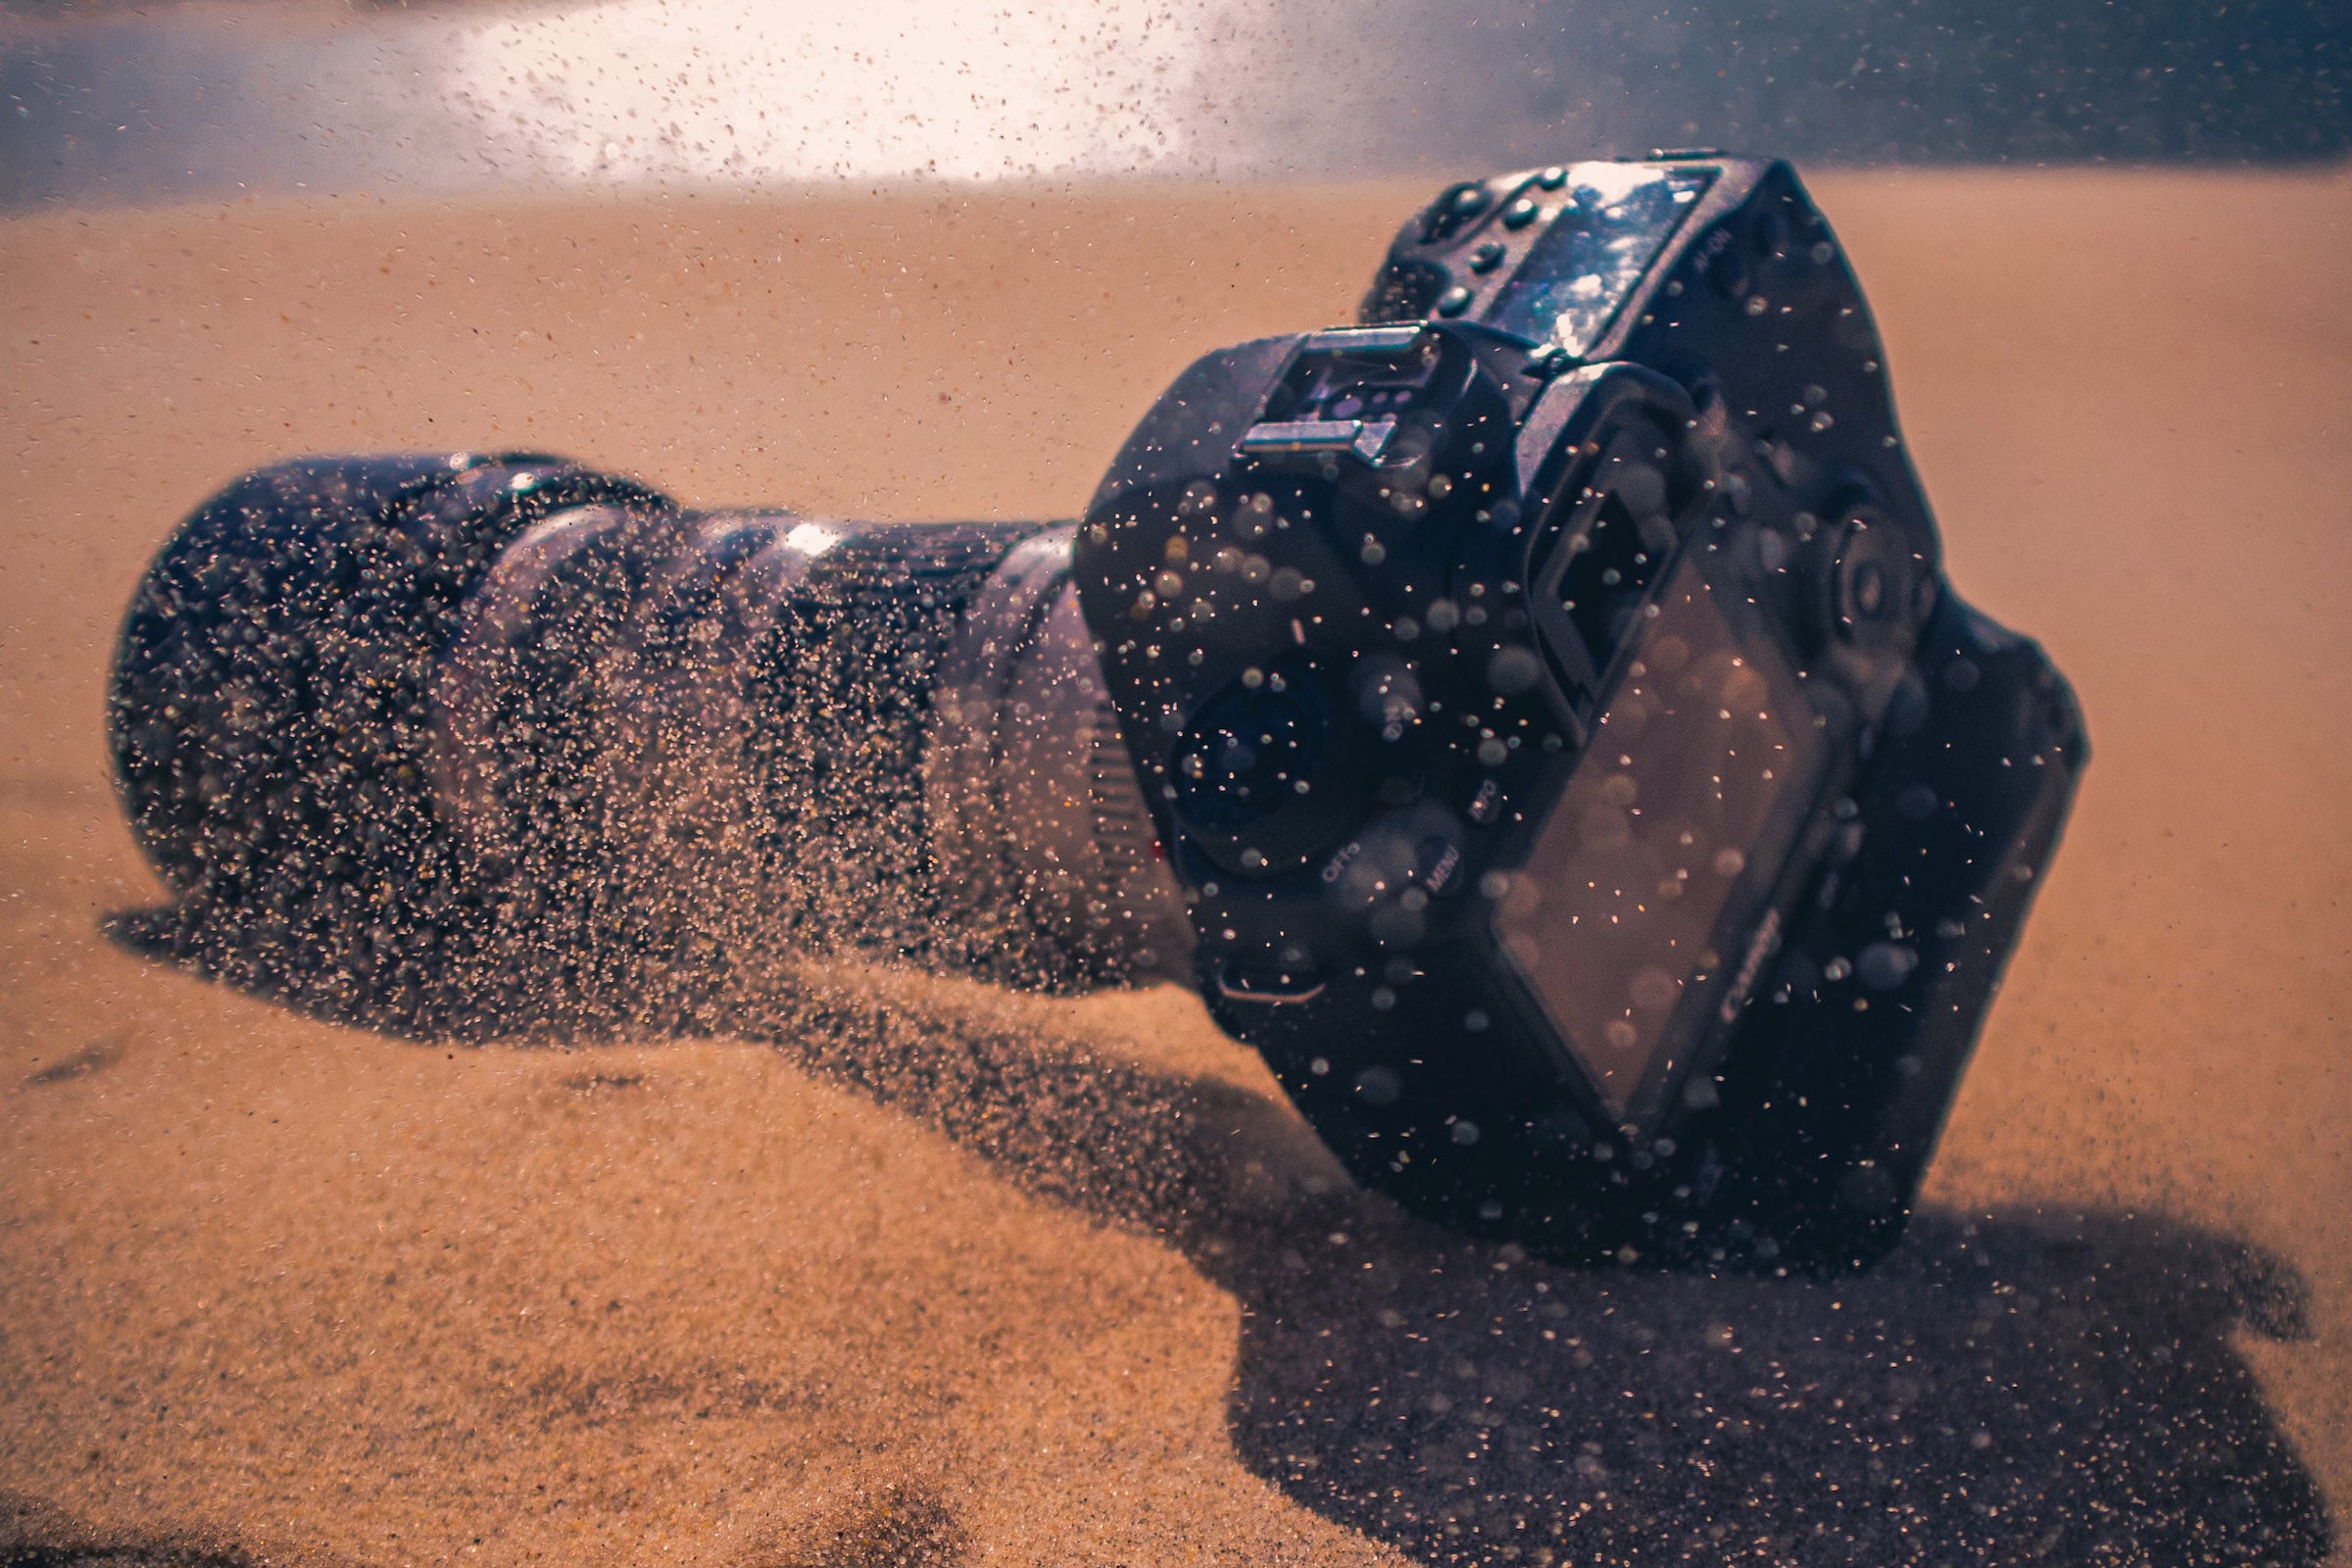 sand gets in a camera while hiking in the desert